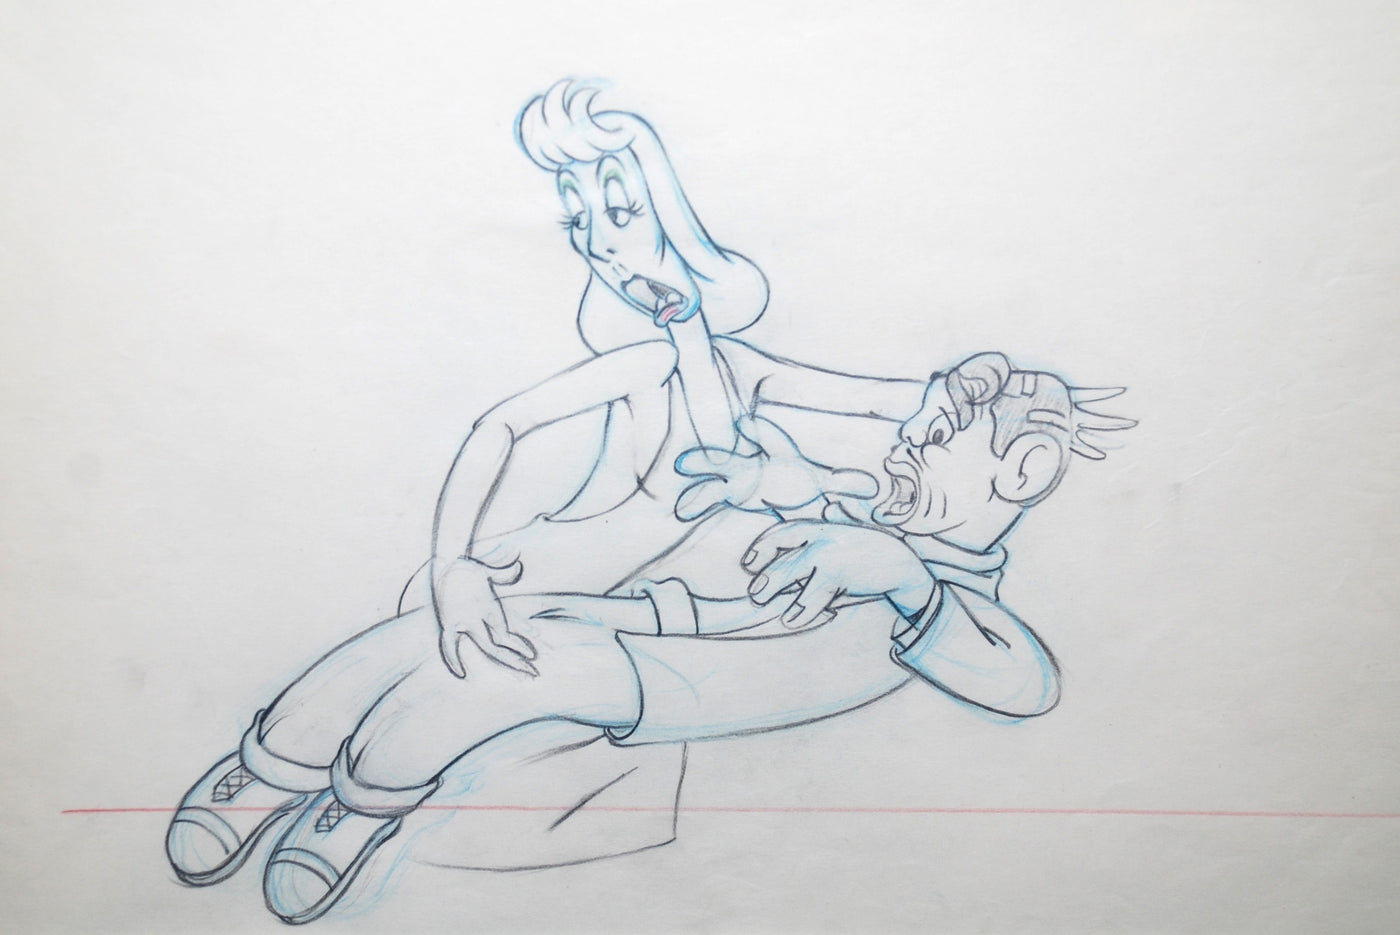 Original Walt Disney Production Drawing from Mother Goose Goes Hollywood featuring Clark Gable and Greta Garbo